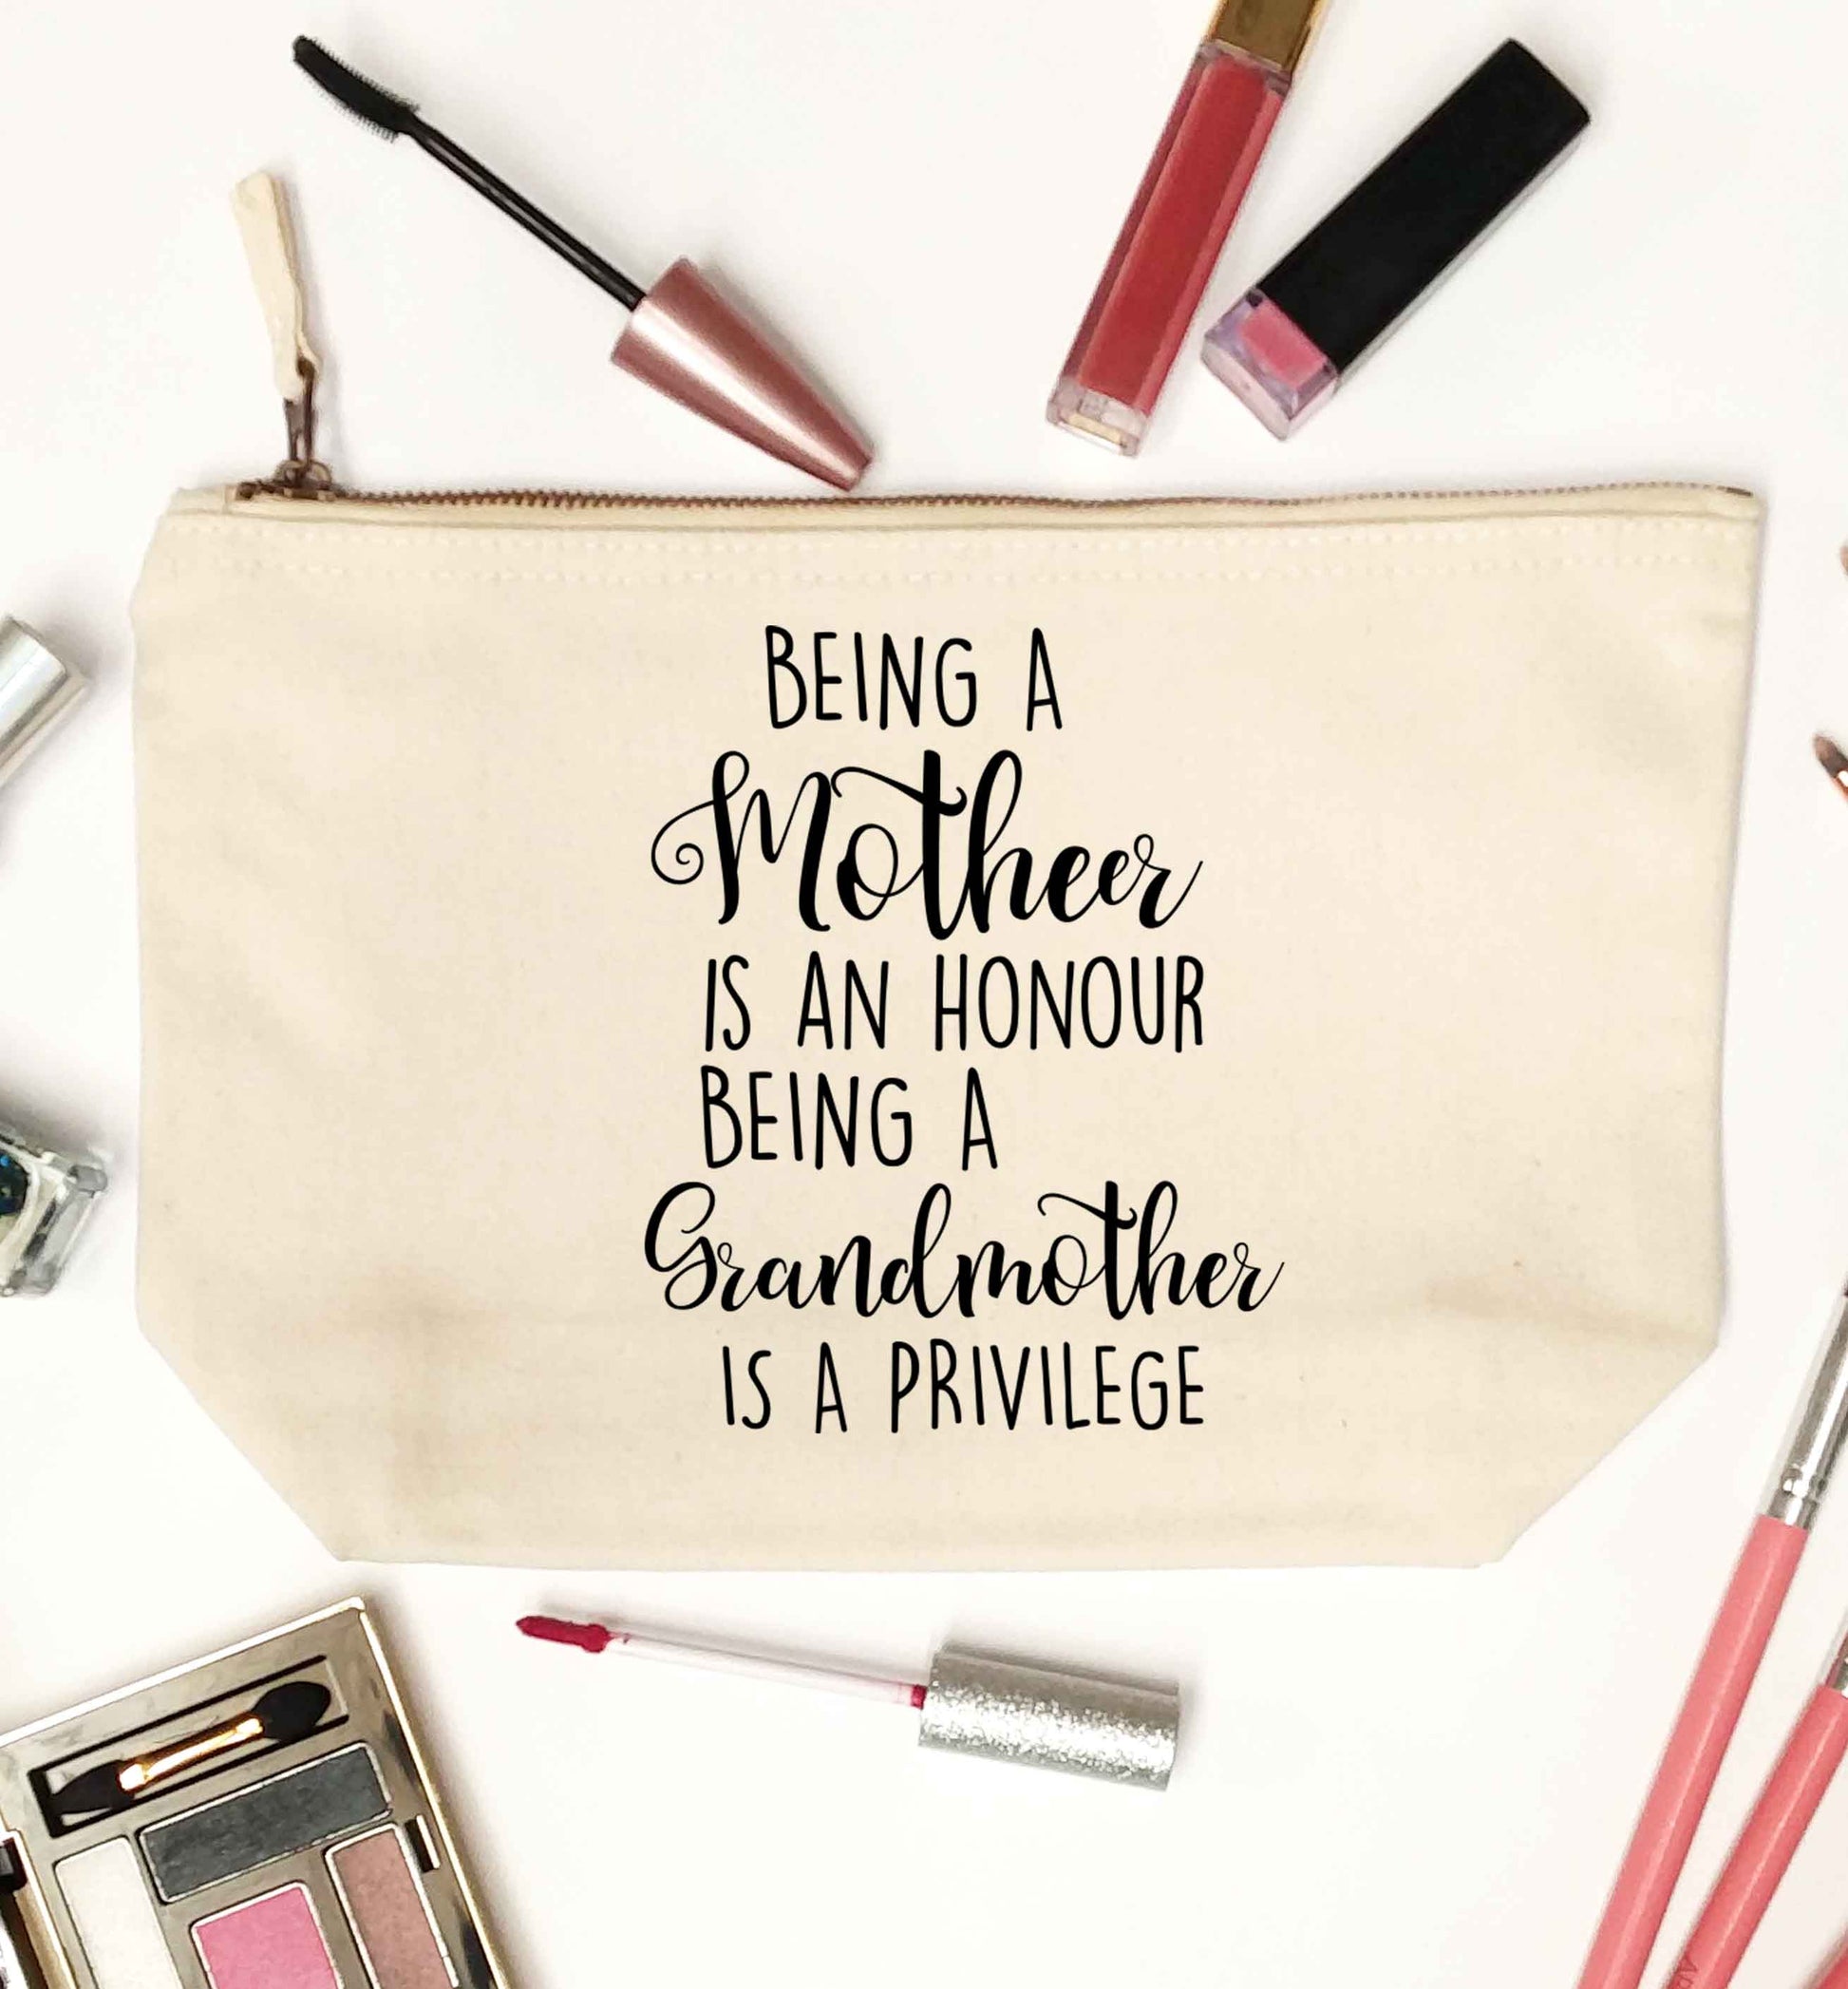 Being a mother is an honour being an grandmother is a privilege natural makeup bag